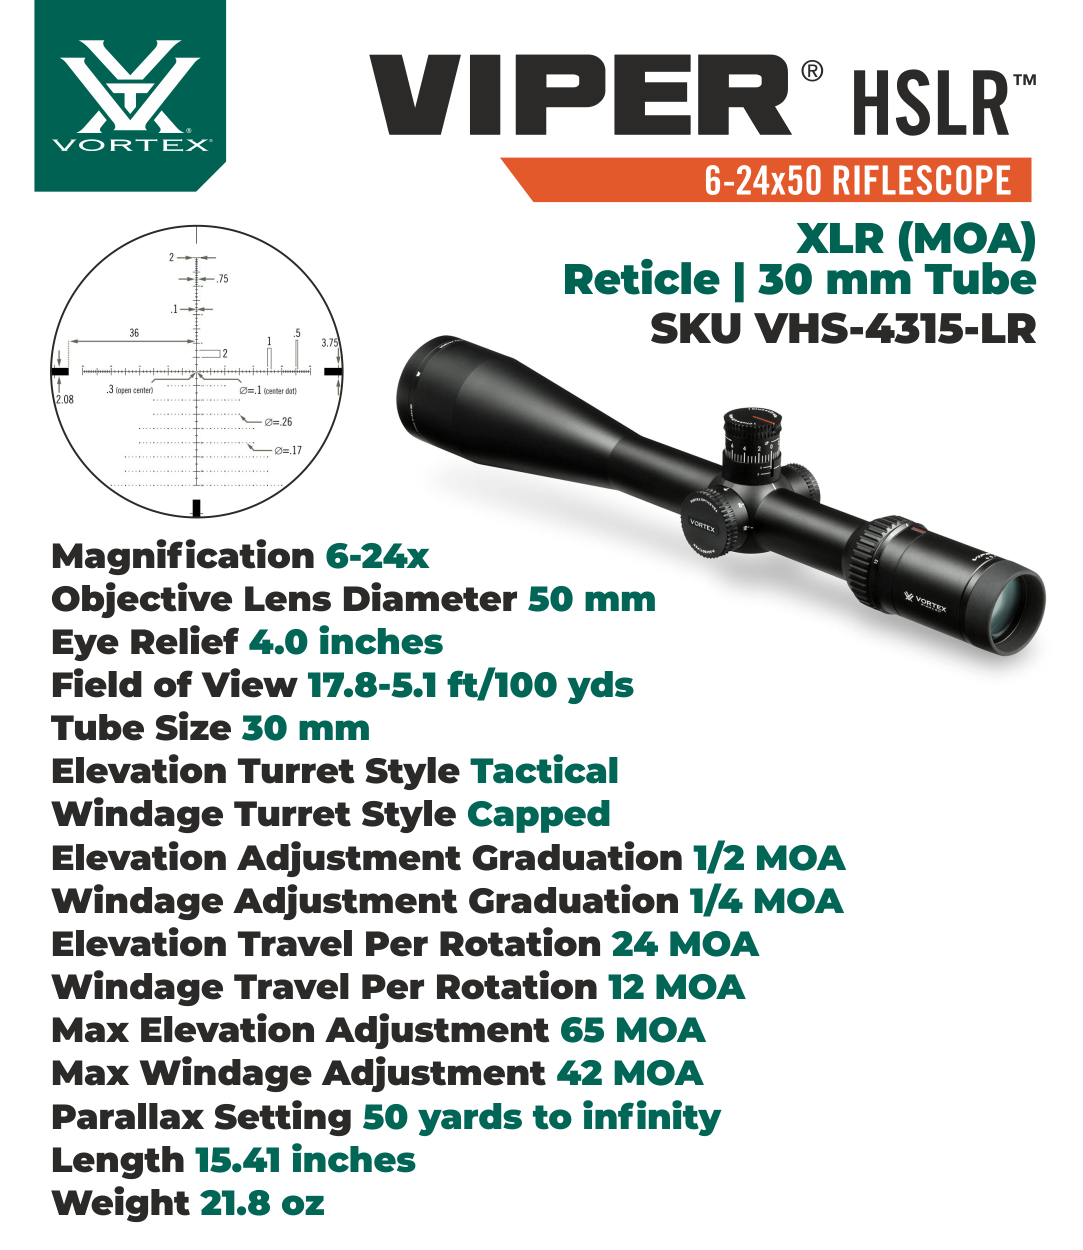 Vortex Optics Viper HSLR 6-24X50 XLR (MOA) Reticle First Focal Plane, 30 mm Tube with Free Hat Bundle - image 5 of 7